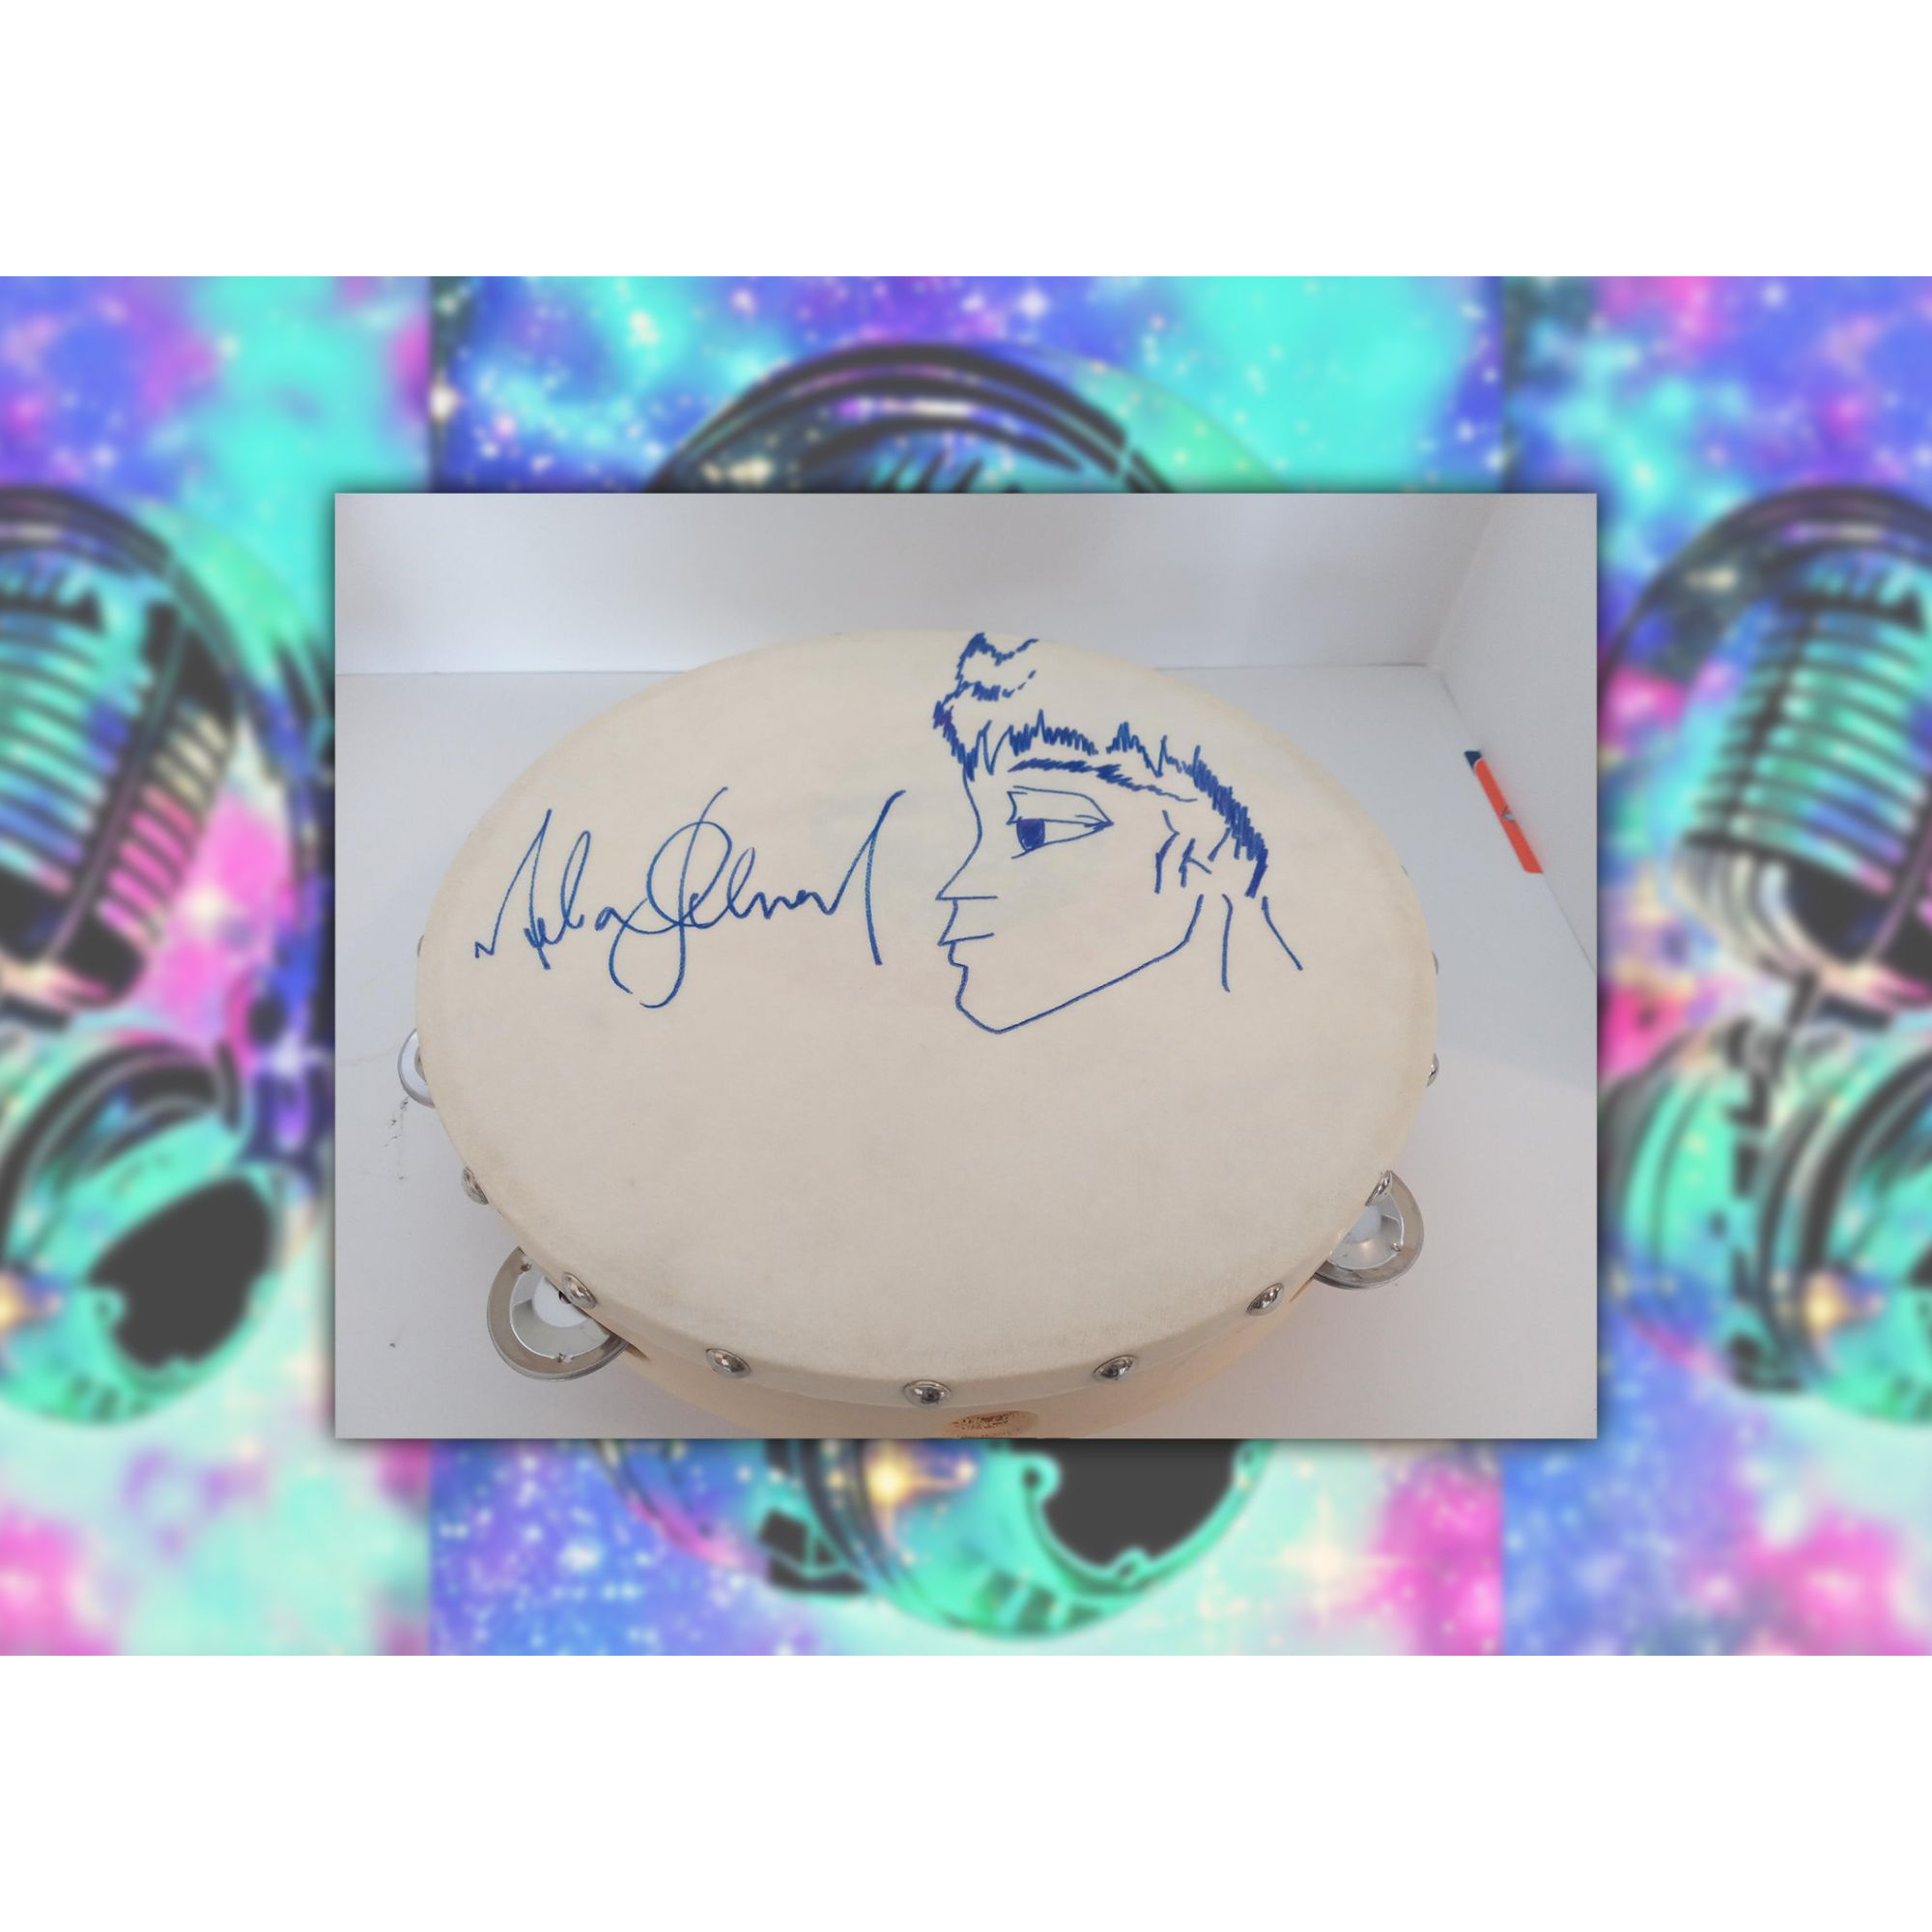 Michael Jackson 14-in tambourine with one of a kind sketch and signed with proof